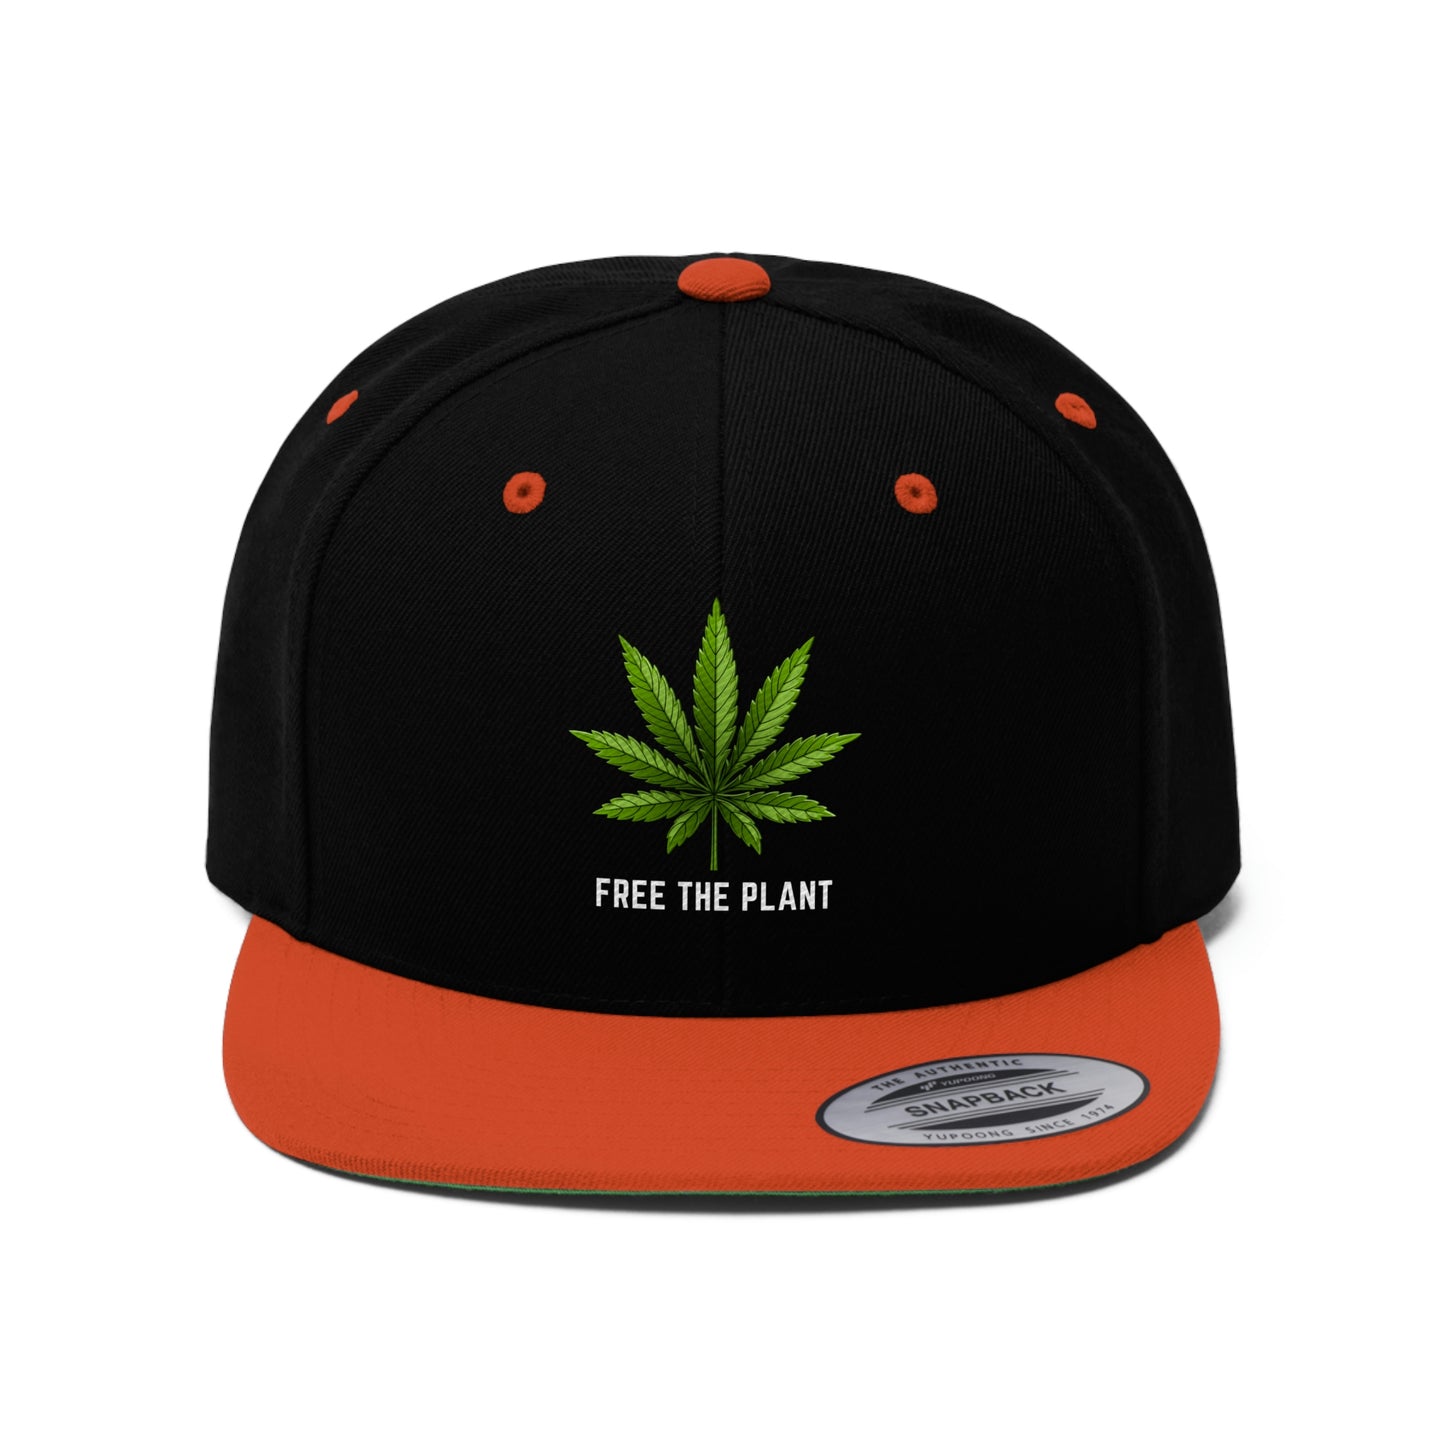 Picture of the orange and black Free The Plant Marijuana Snapback Hat with weed leaf